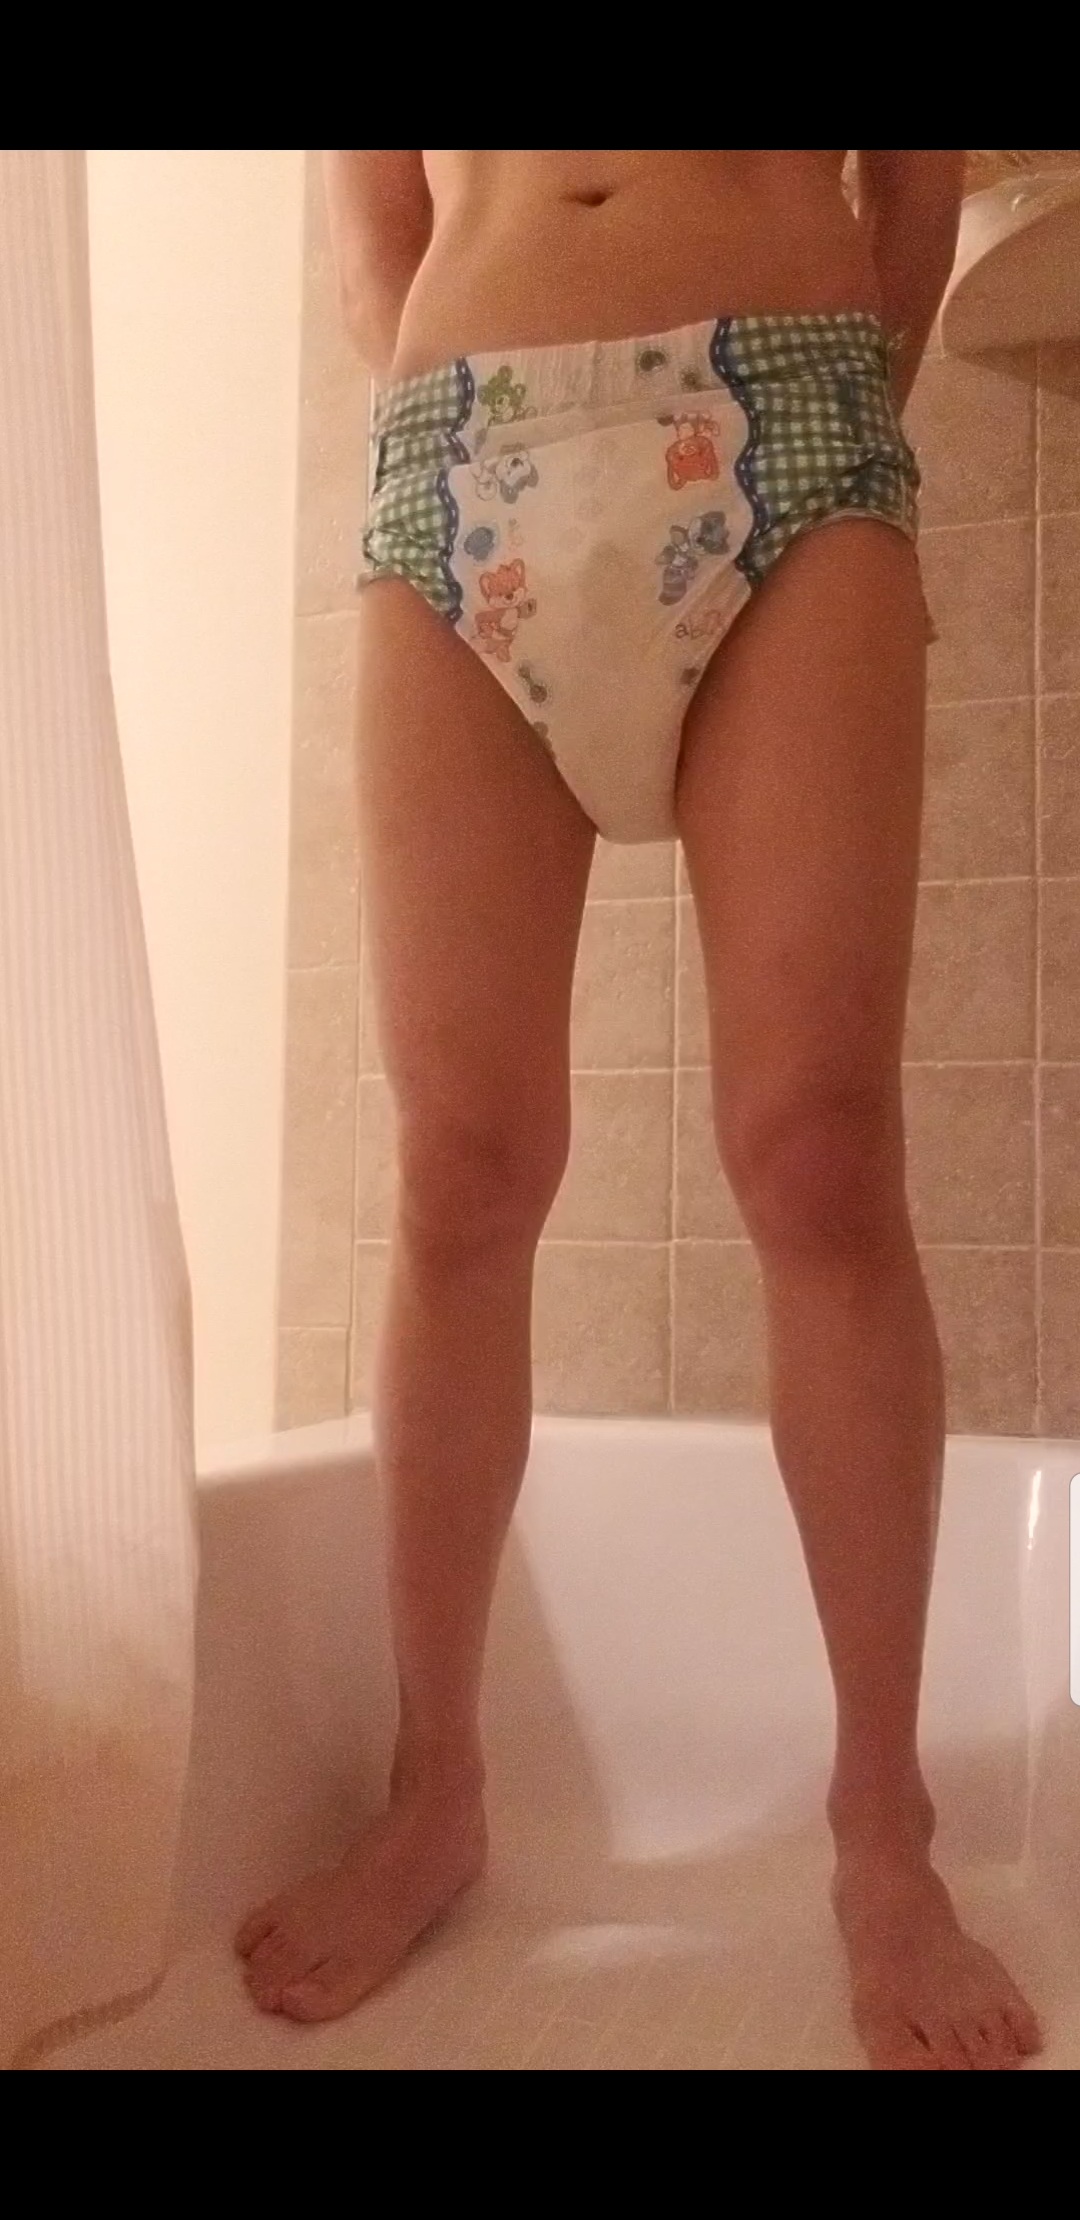 Playing in a wet & messy diaper